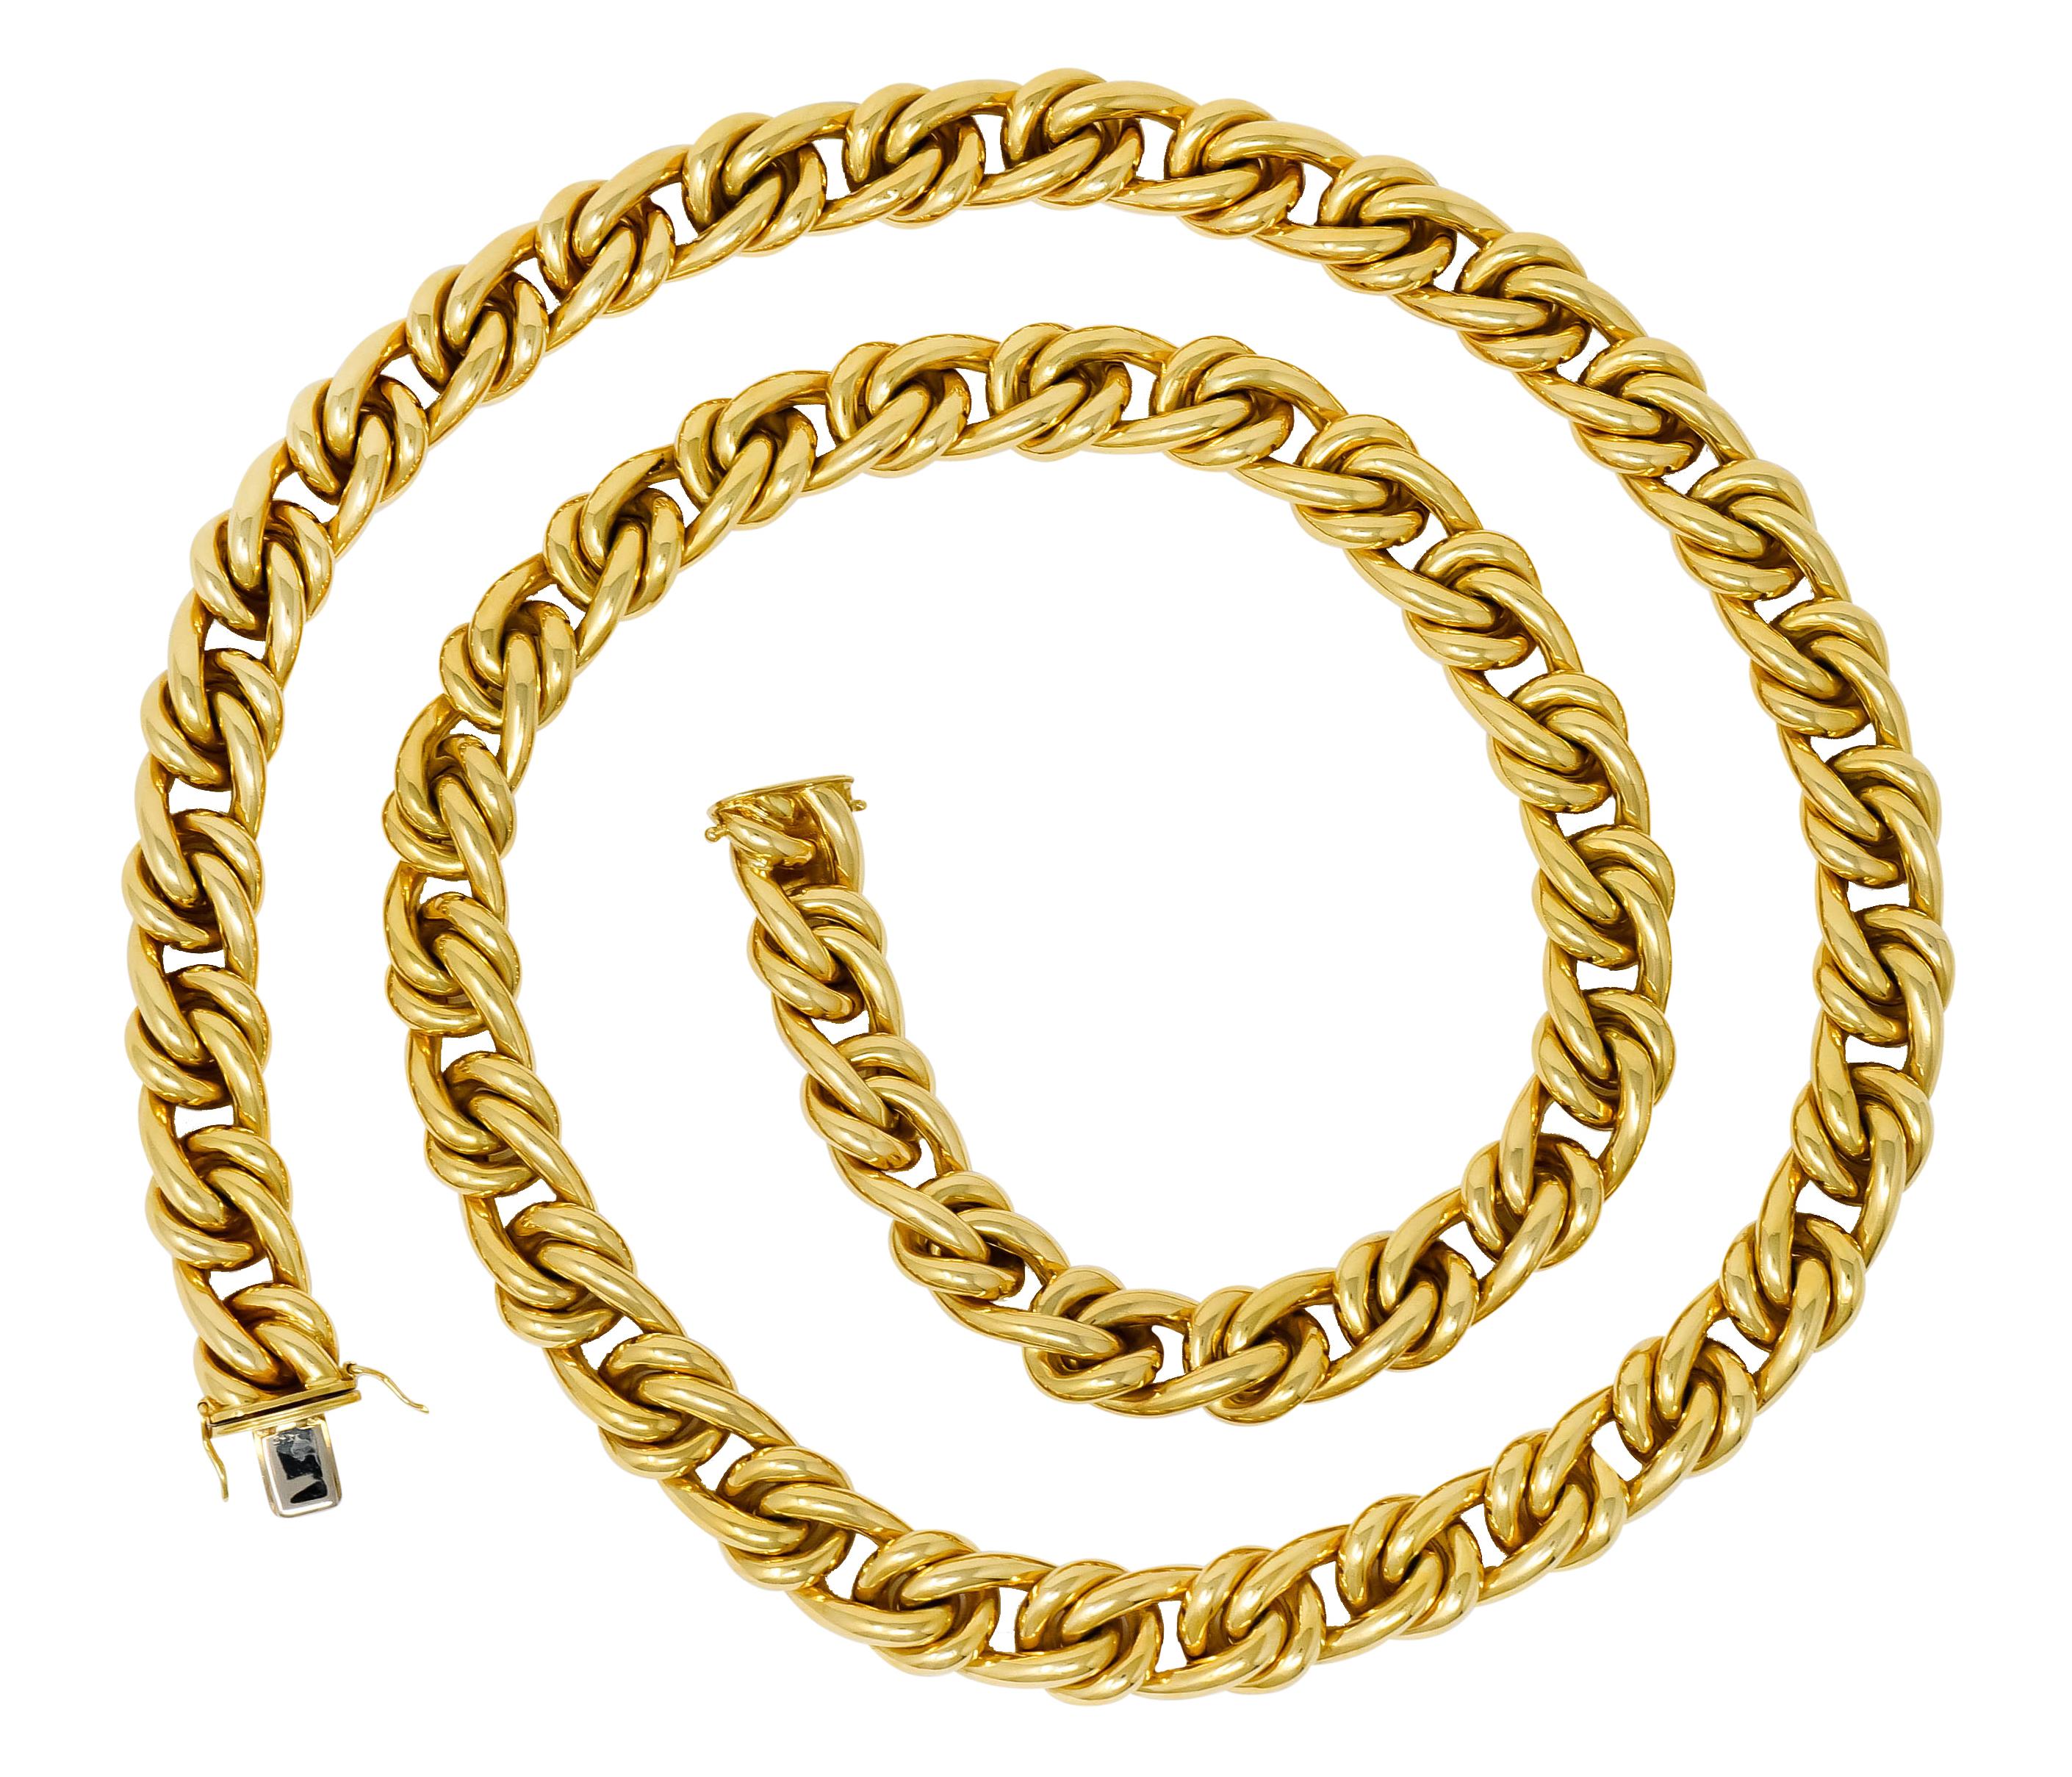 Large continuous chain necklace comprised of round links alternating with ribbed spacer links

Featuring a bright polished finish

Fully signed Tiffany & Co.

Stamped 750 for 18 karat gold

Circa: 1980s

Length: approx. 37 inches

Width: 1/2